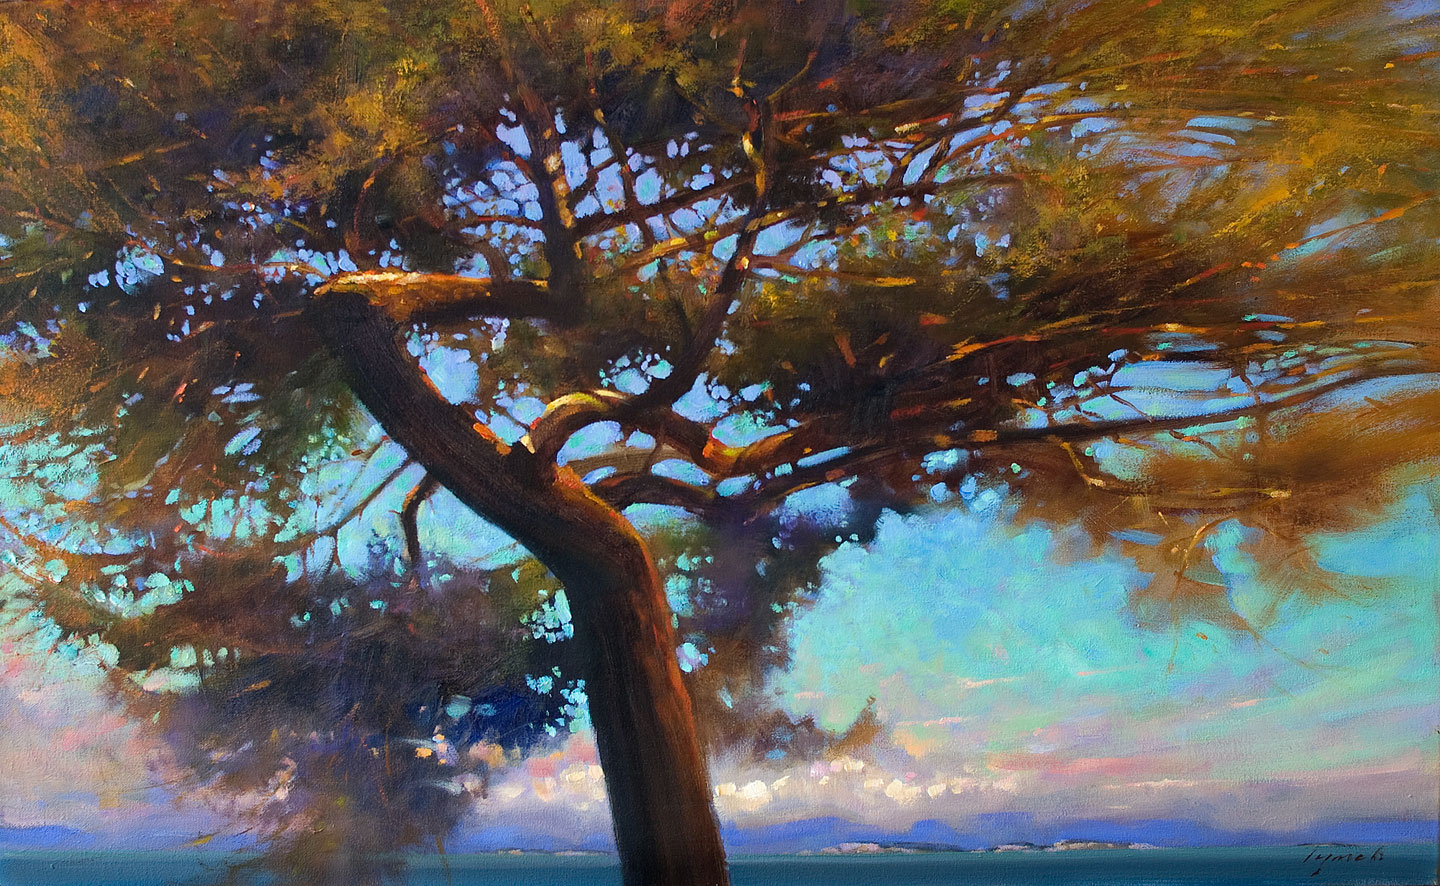 'Twisted Fir' 24 X 36 in. oil on canvas - Avenue Gallery. copyright Brent Lynch